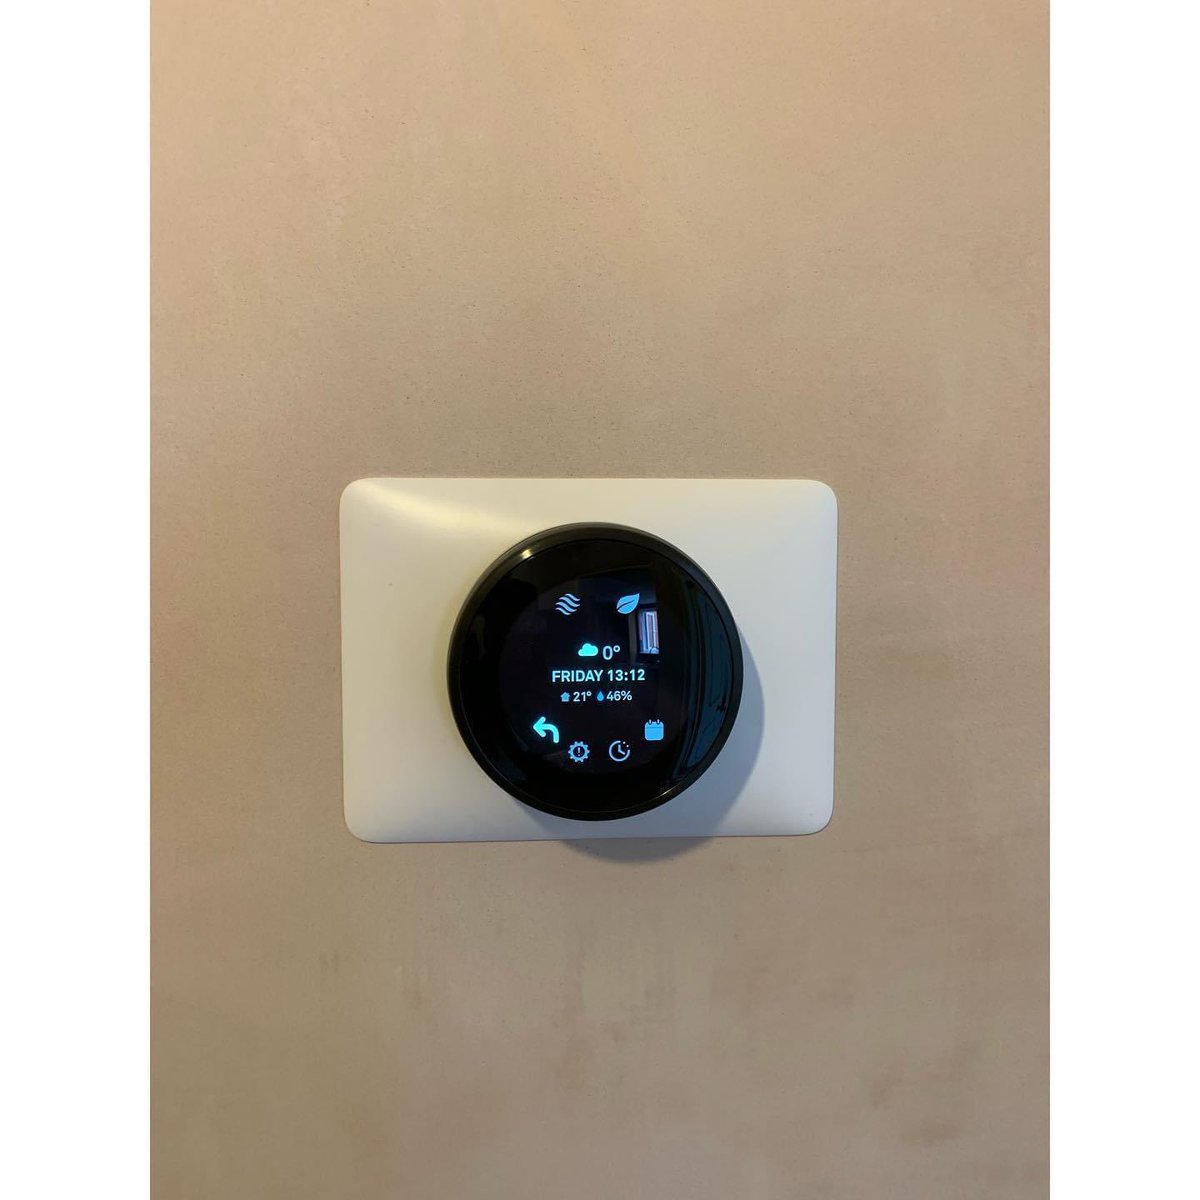 Another happy customer! Combi for Combi with this new Vaillant ecoFIT and Nest Thermostat installed by IMA Heating Solutions Ltd. 

#vaillant #heating #gas #plumbing #copper #boiler #gasengineer #nestthermostat #smartcontrols #plumber #imaheatingsolutions